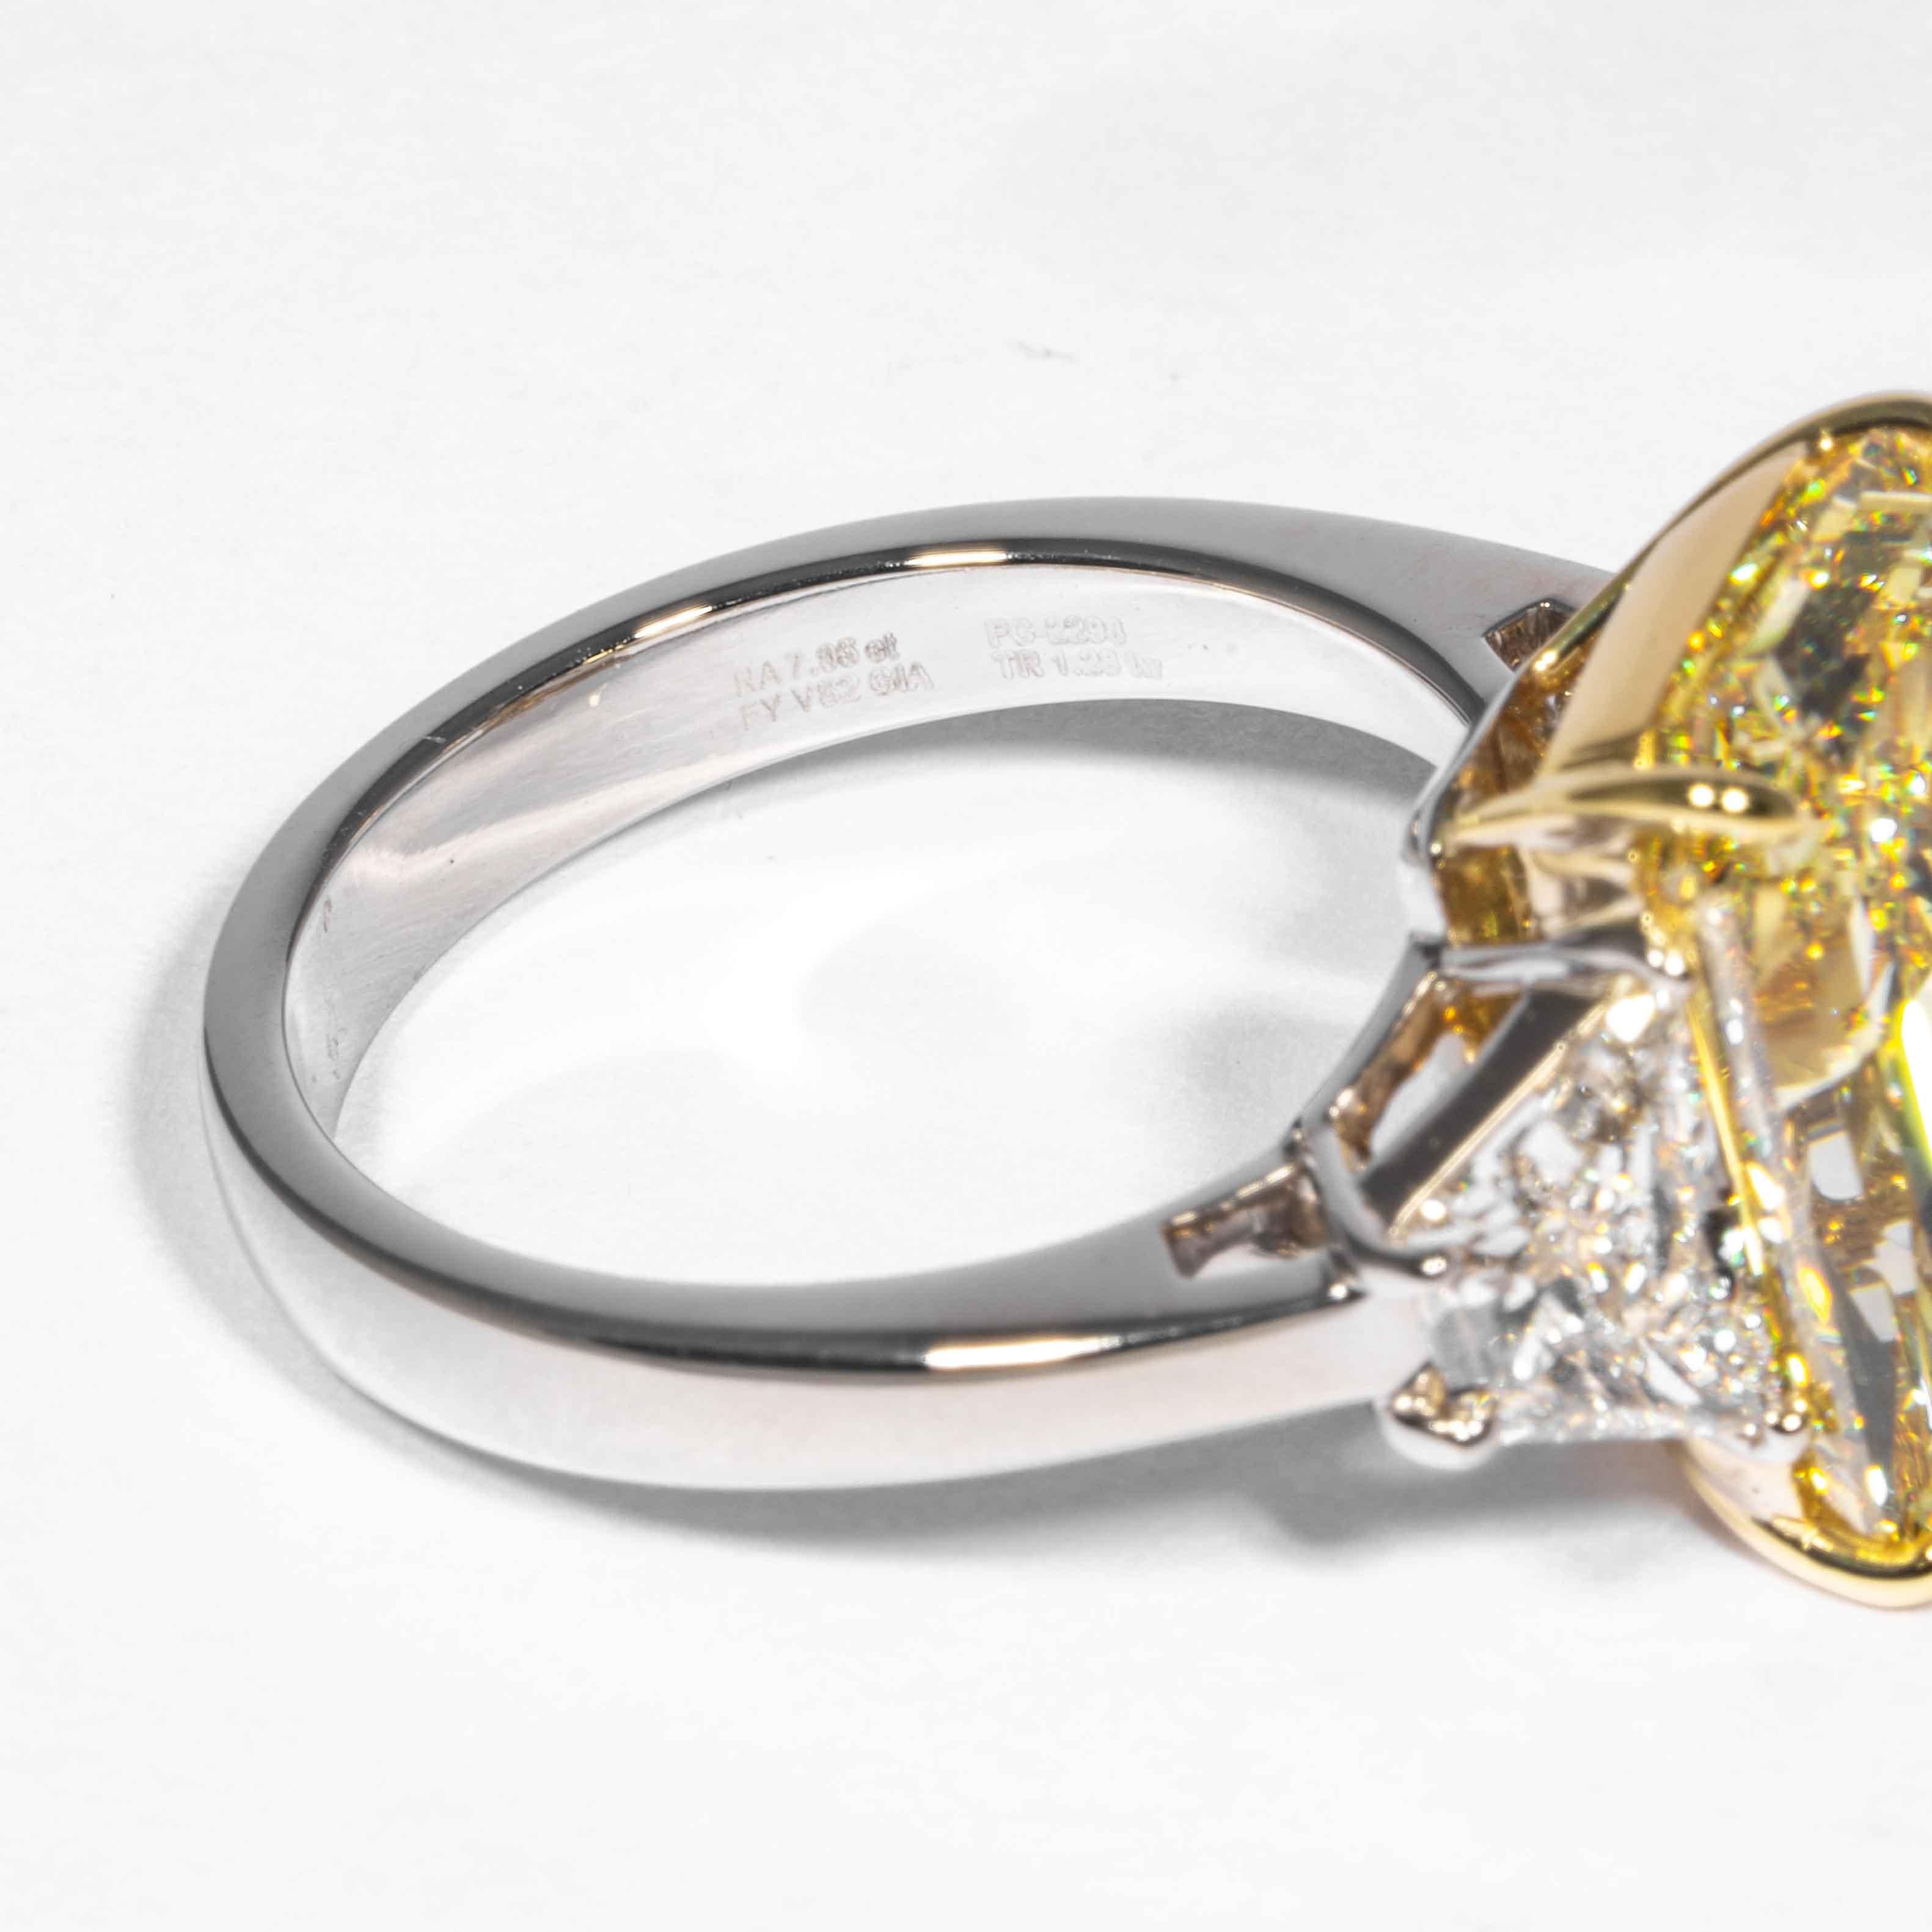 Radiant Cut Shreve, Crump & Low GIA Certified 7.95 Carat Fancy Yellow Radiant Diamond Ring For Sale